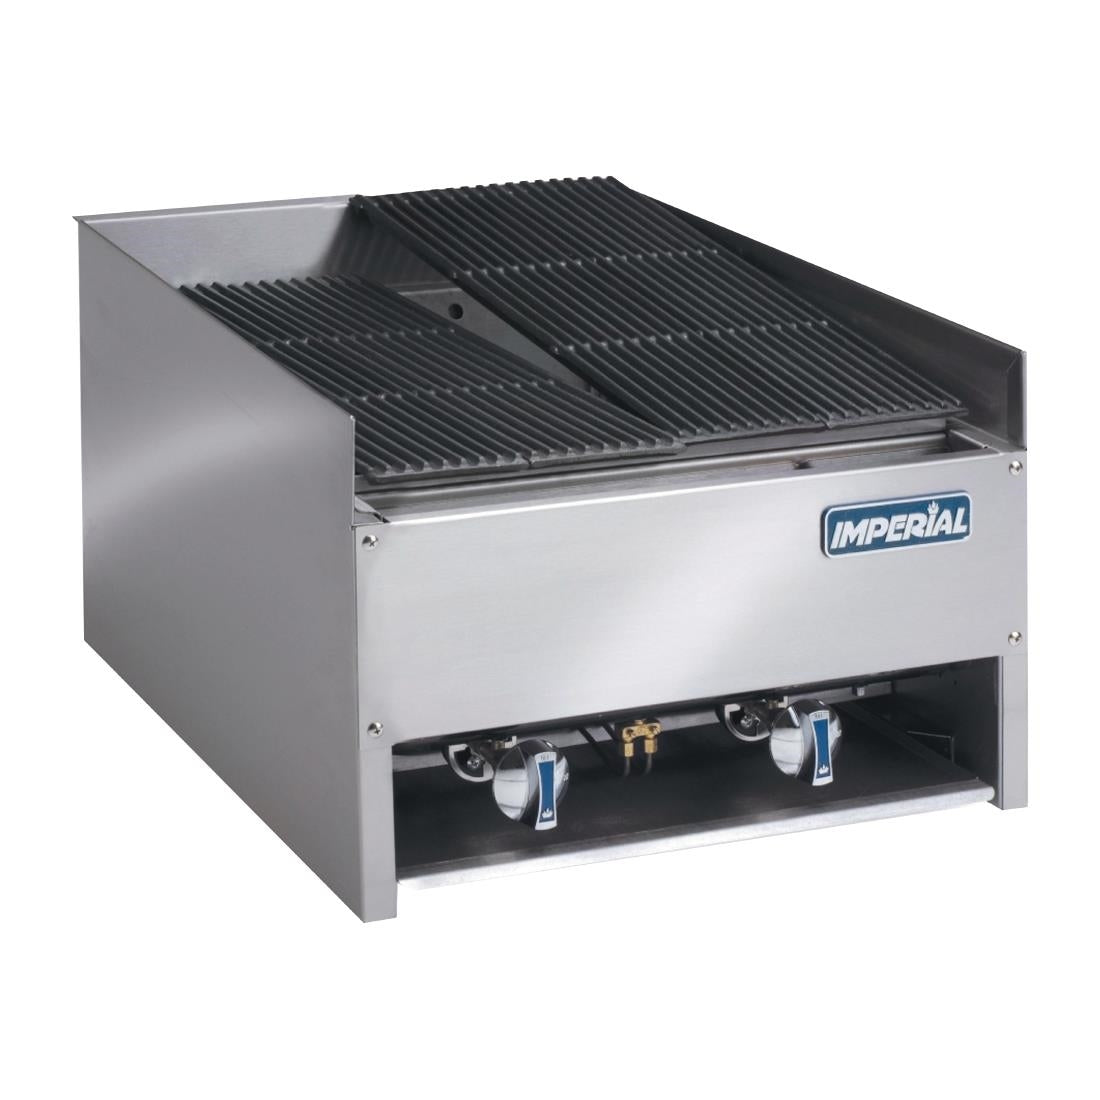 CH502 Imperial EBA2223 Char-Rock Broiler JD Catering Equipment Solutions Ltd